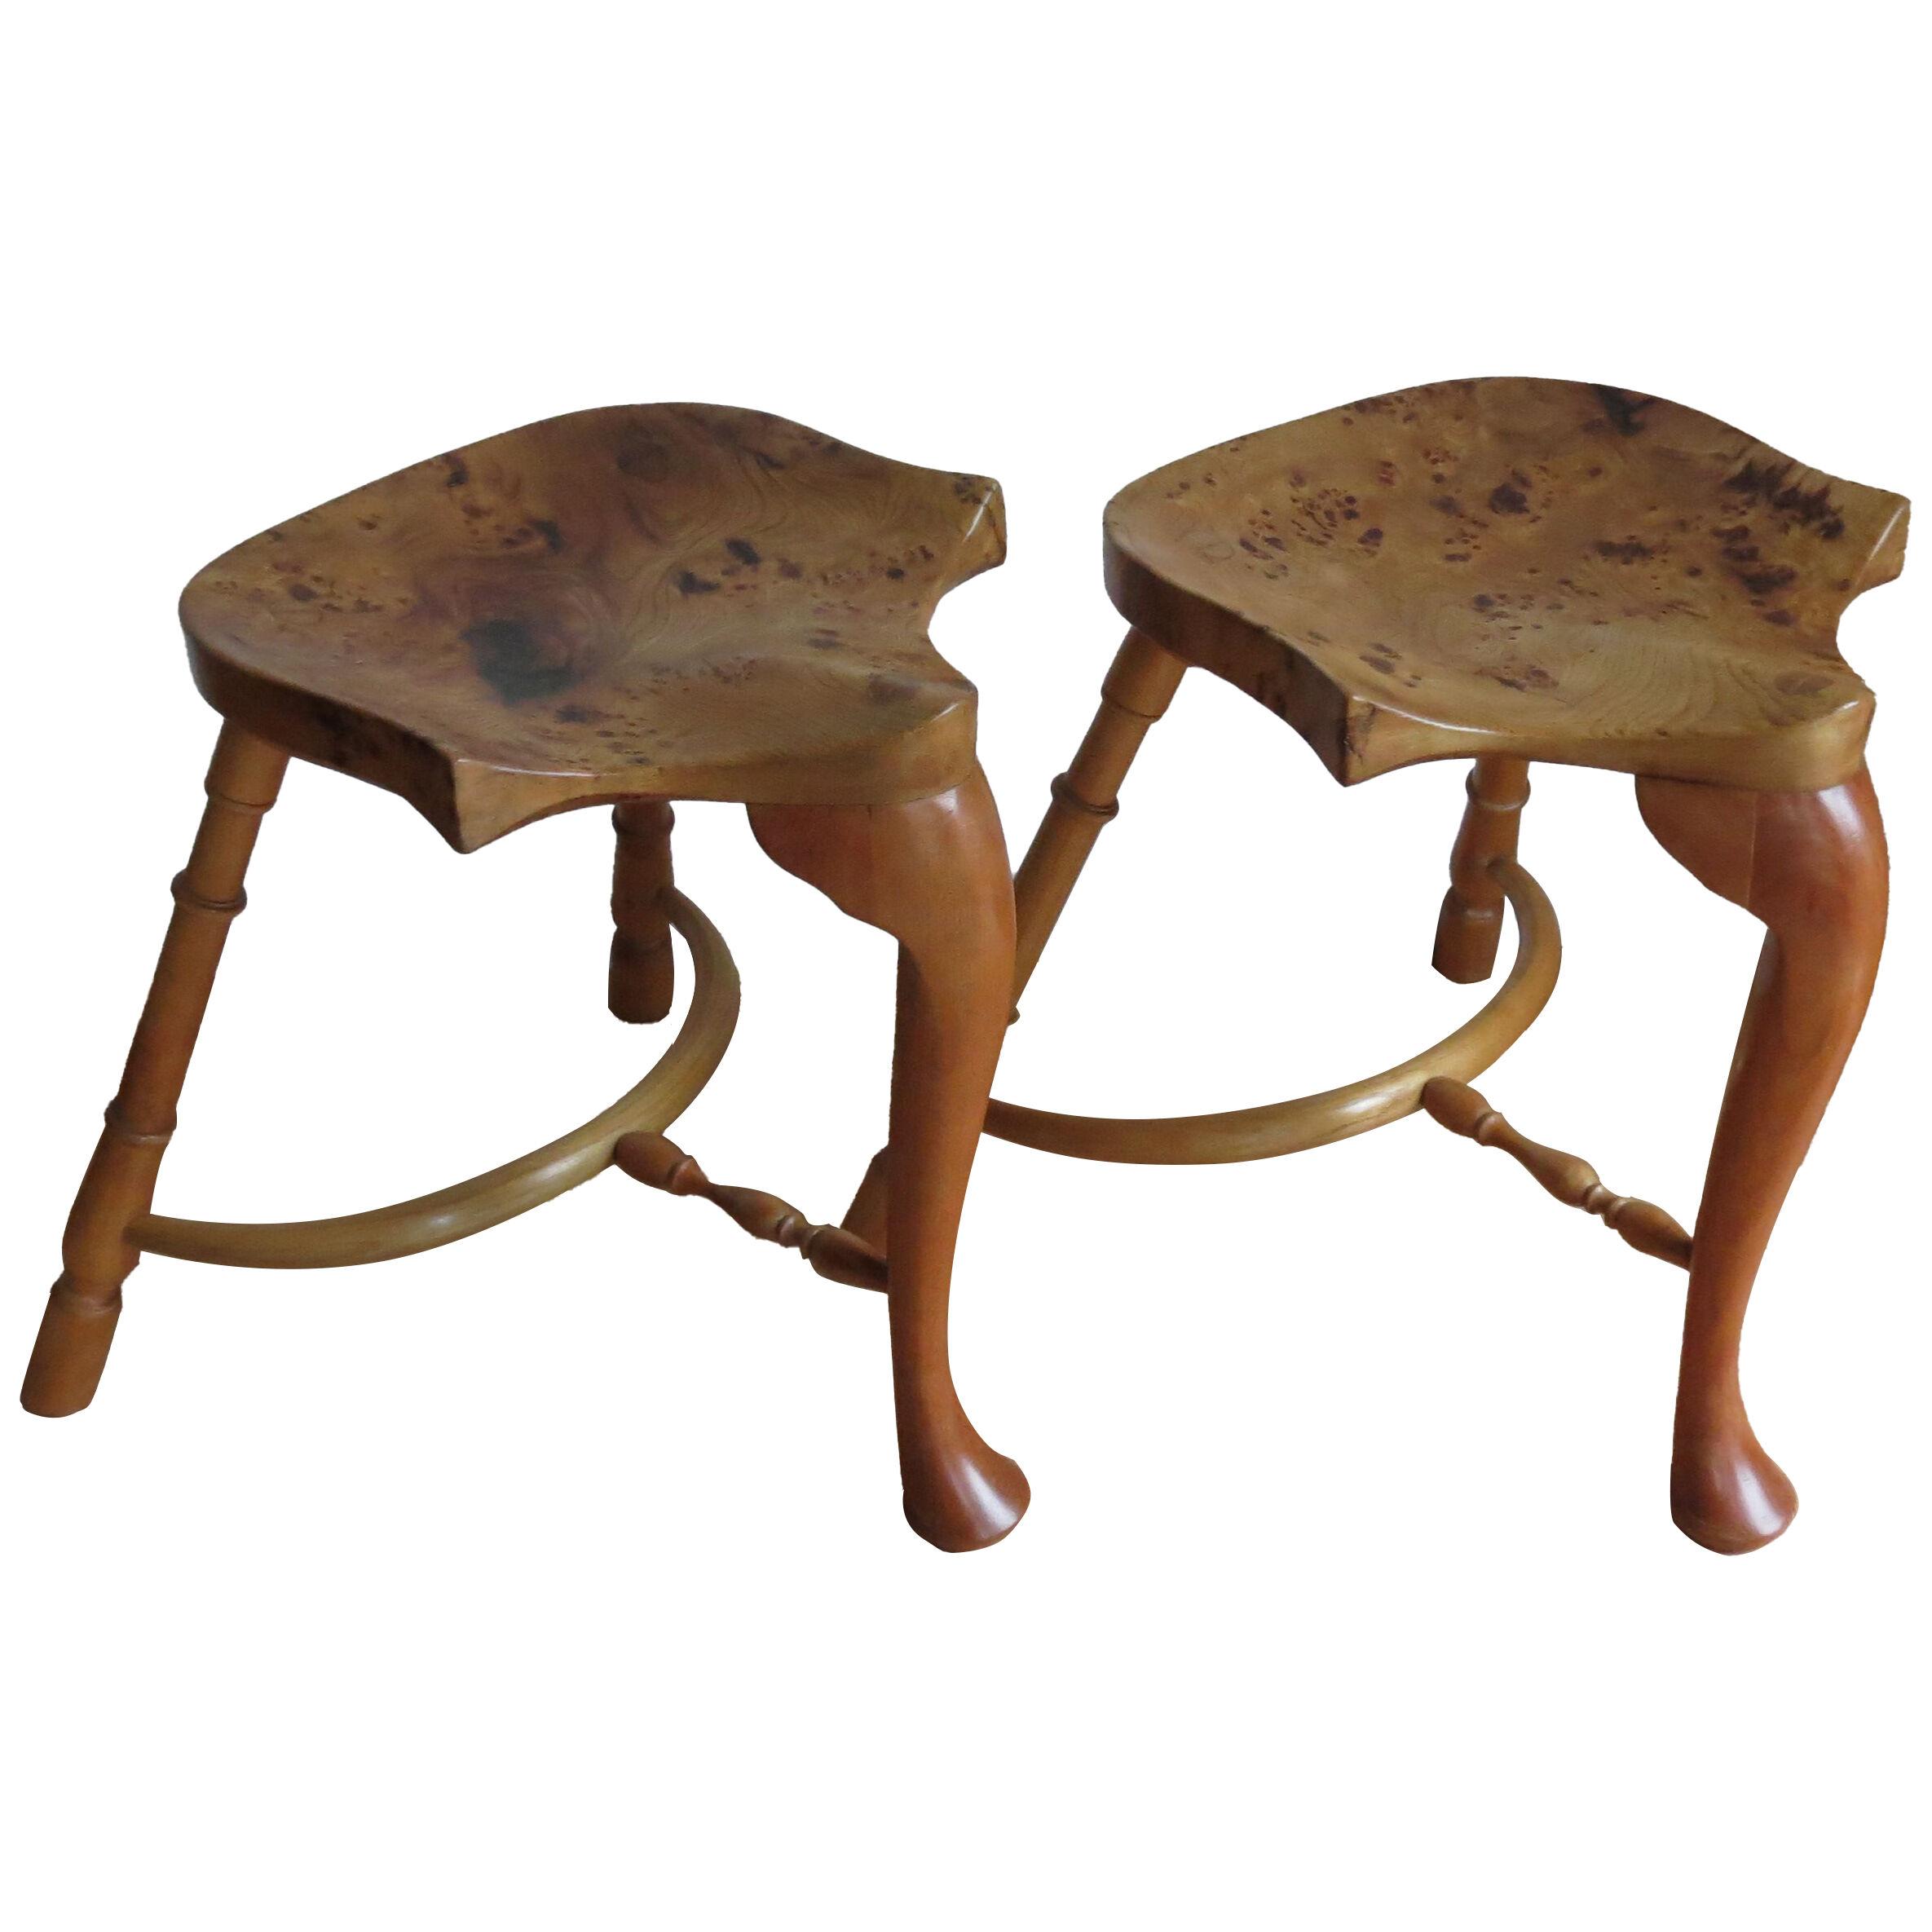 Pair Of Burr Ash Three Legged Stools Bespoke Made By Stewart Linford 4 available